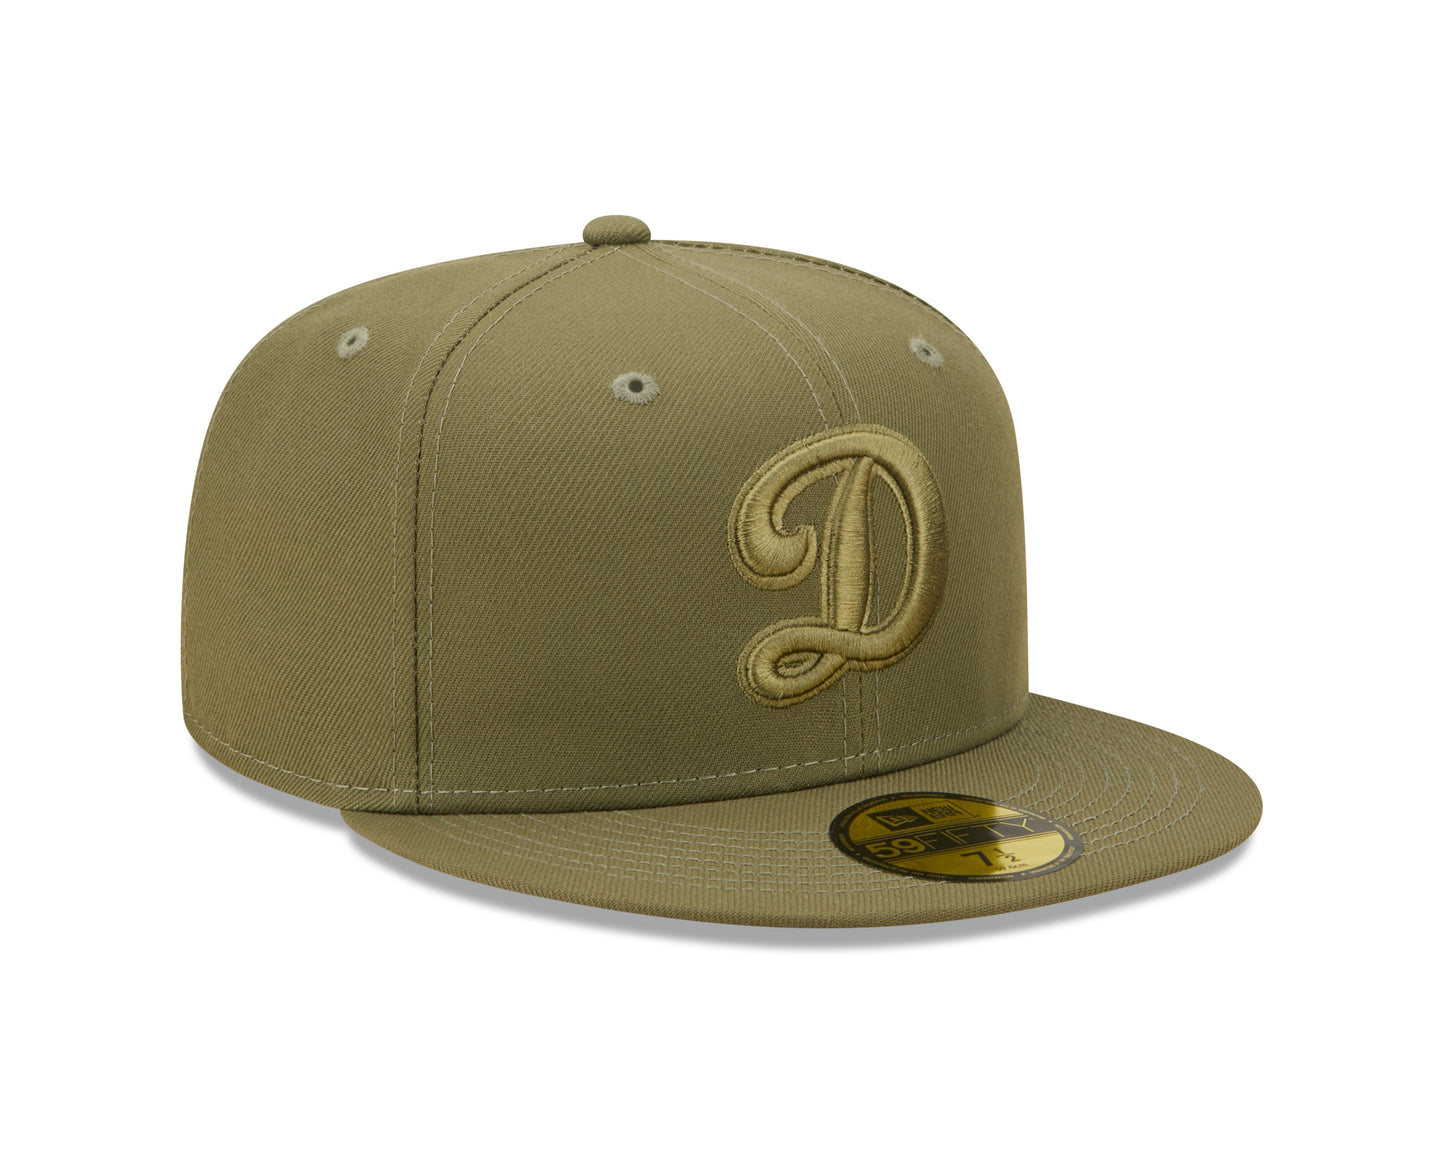 Los Angeles Dodgers "D" New Era Color Pack New Olive 59fifty Fitted Hat